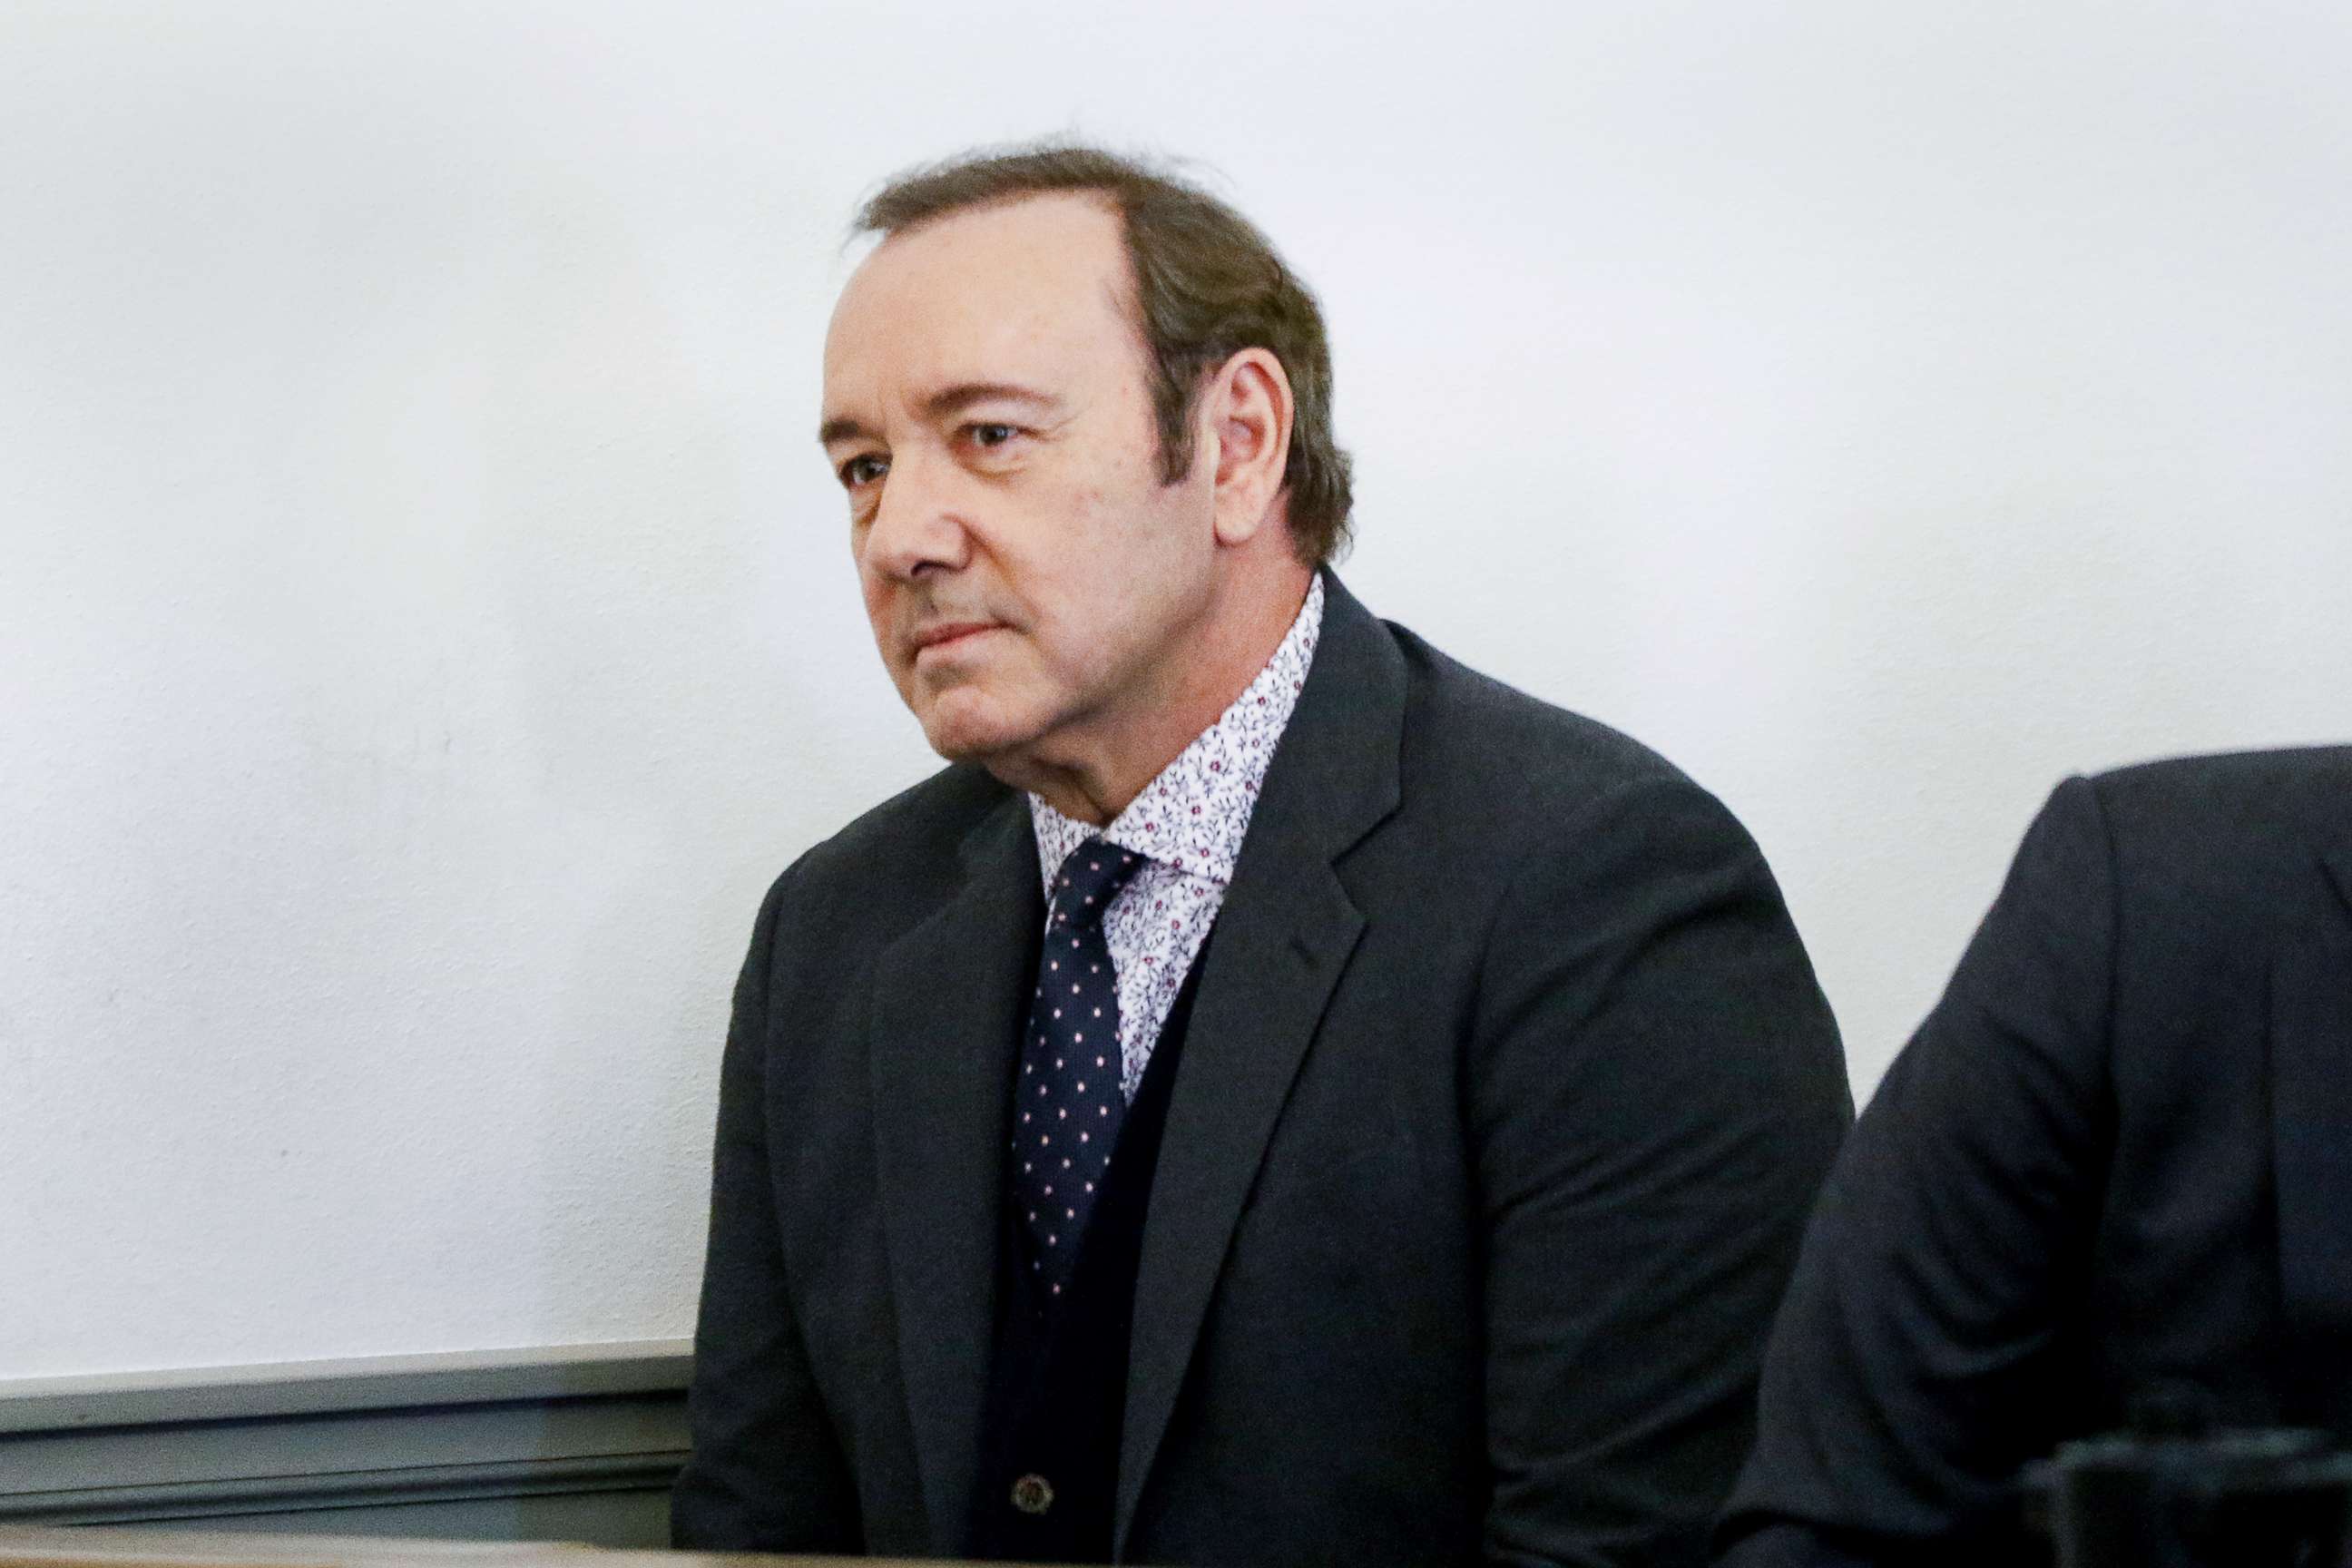 PHOTO: Actor Kevin Spacey attends his arraignment for sexual assault charges at Nantucket District Court on Jan. 7, 2019 in Nantucket, Mass.